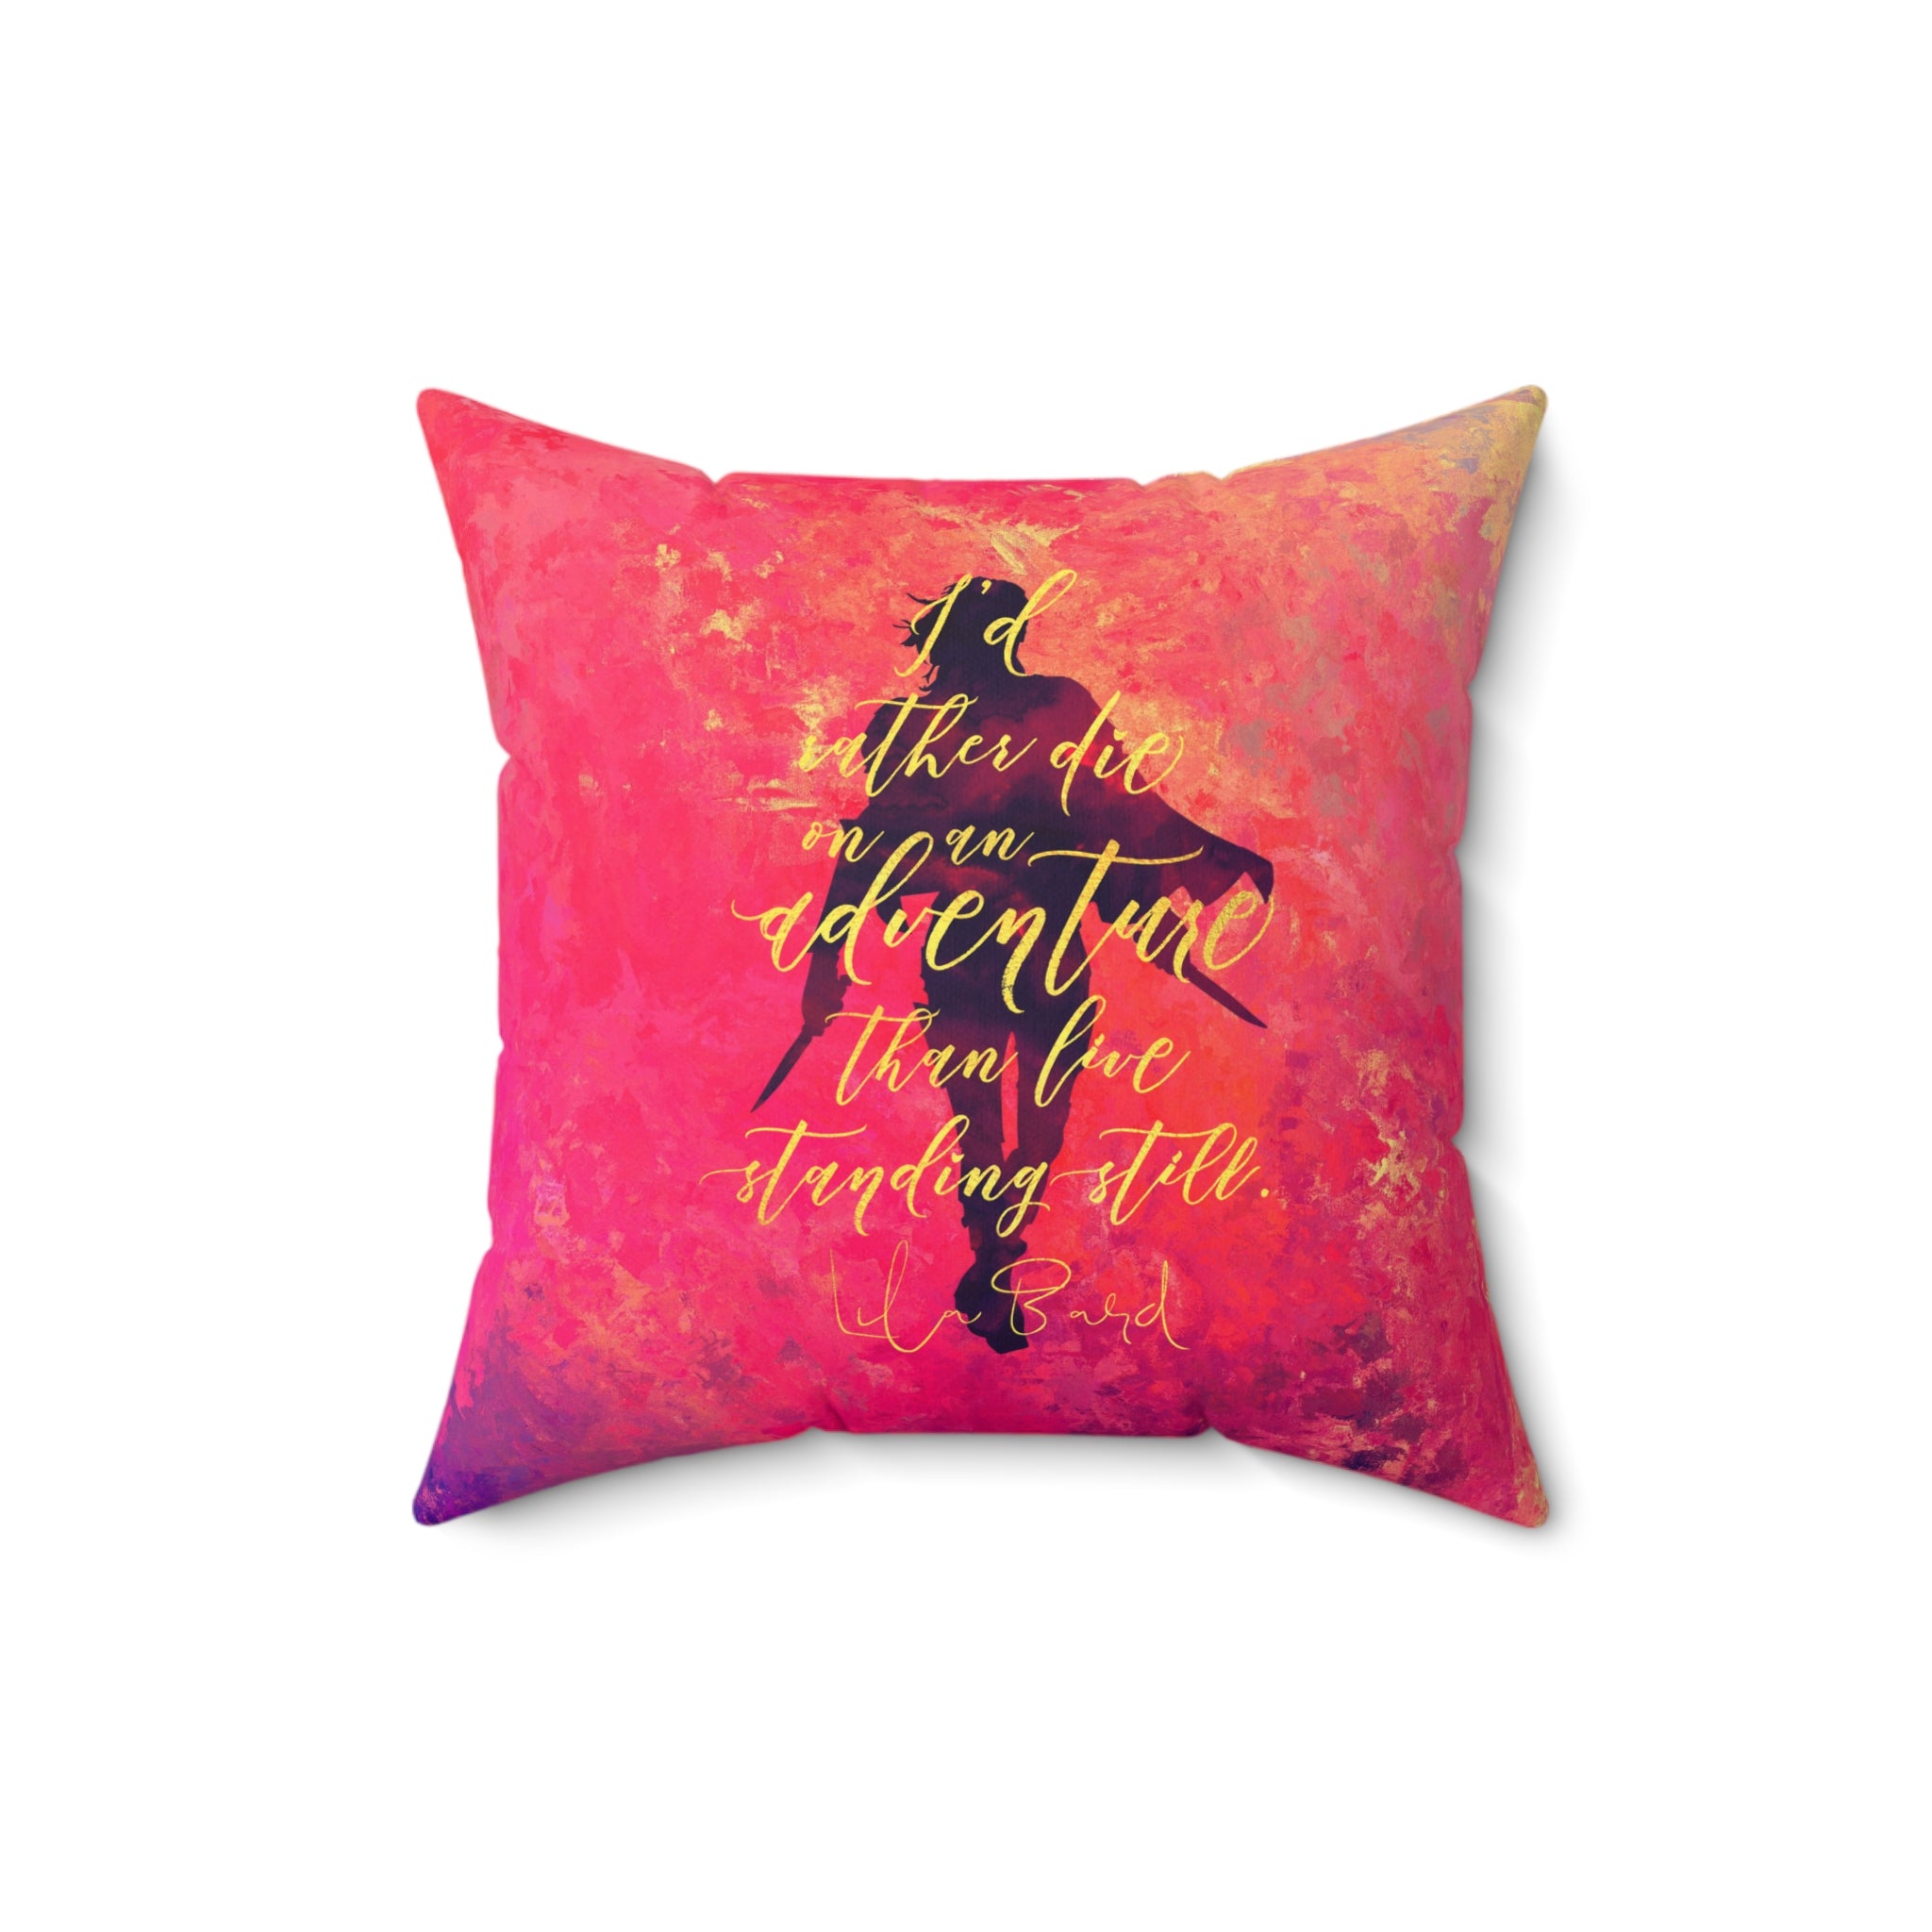 I'd rather die on an adventure... Lila Bard Pillow